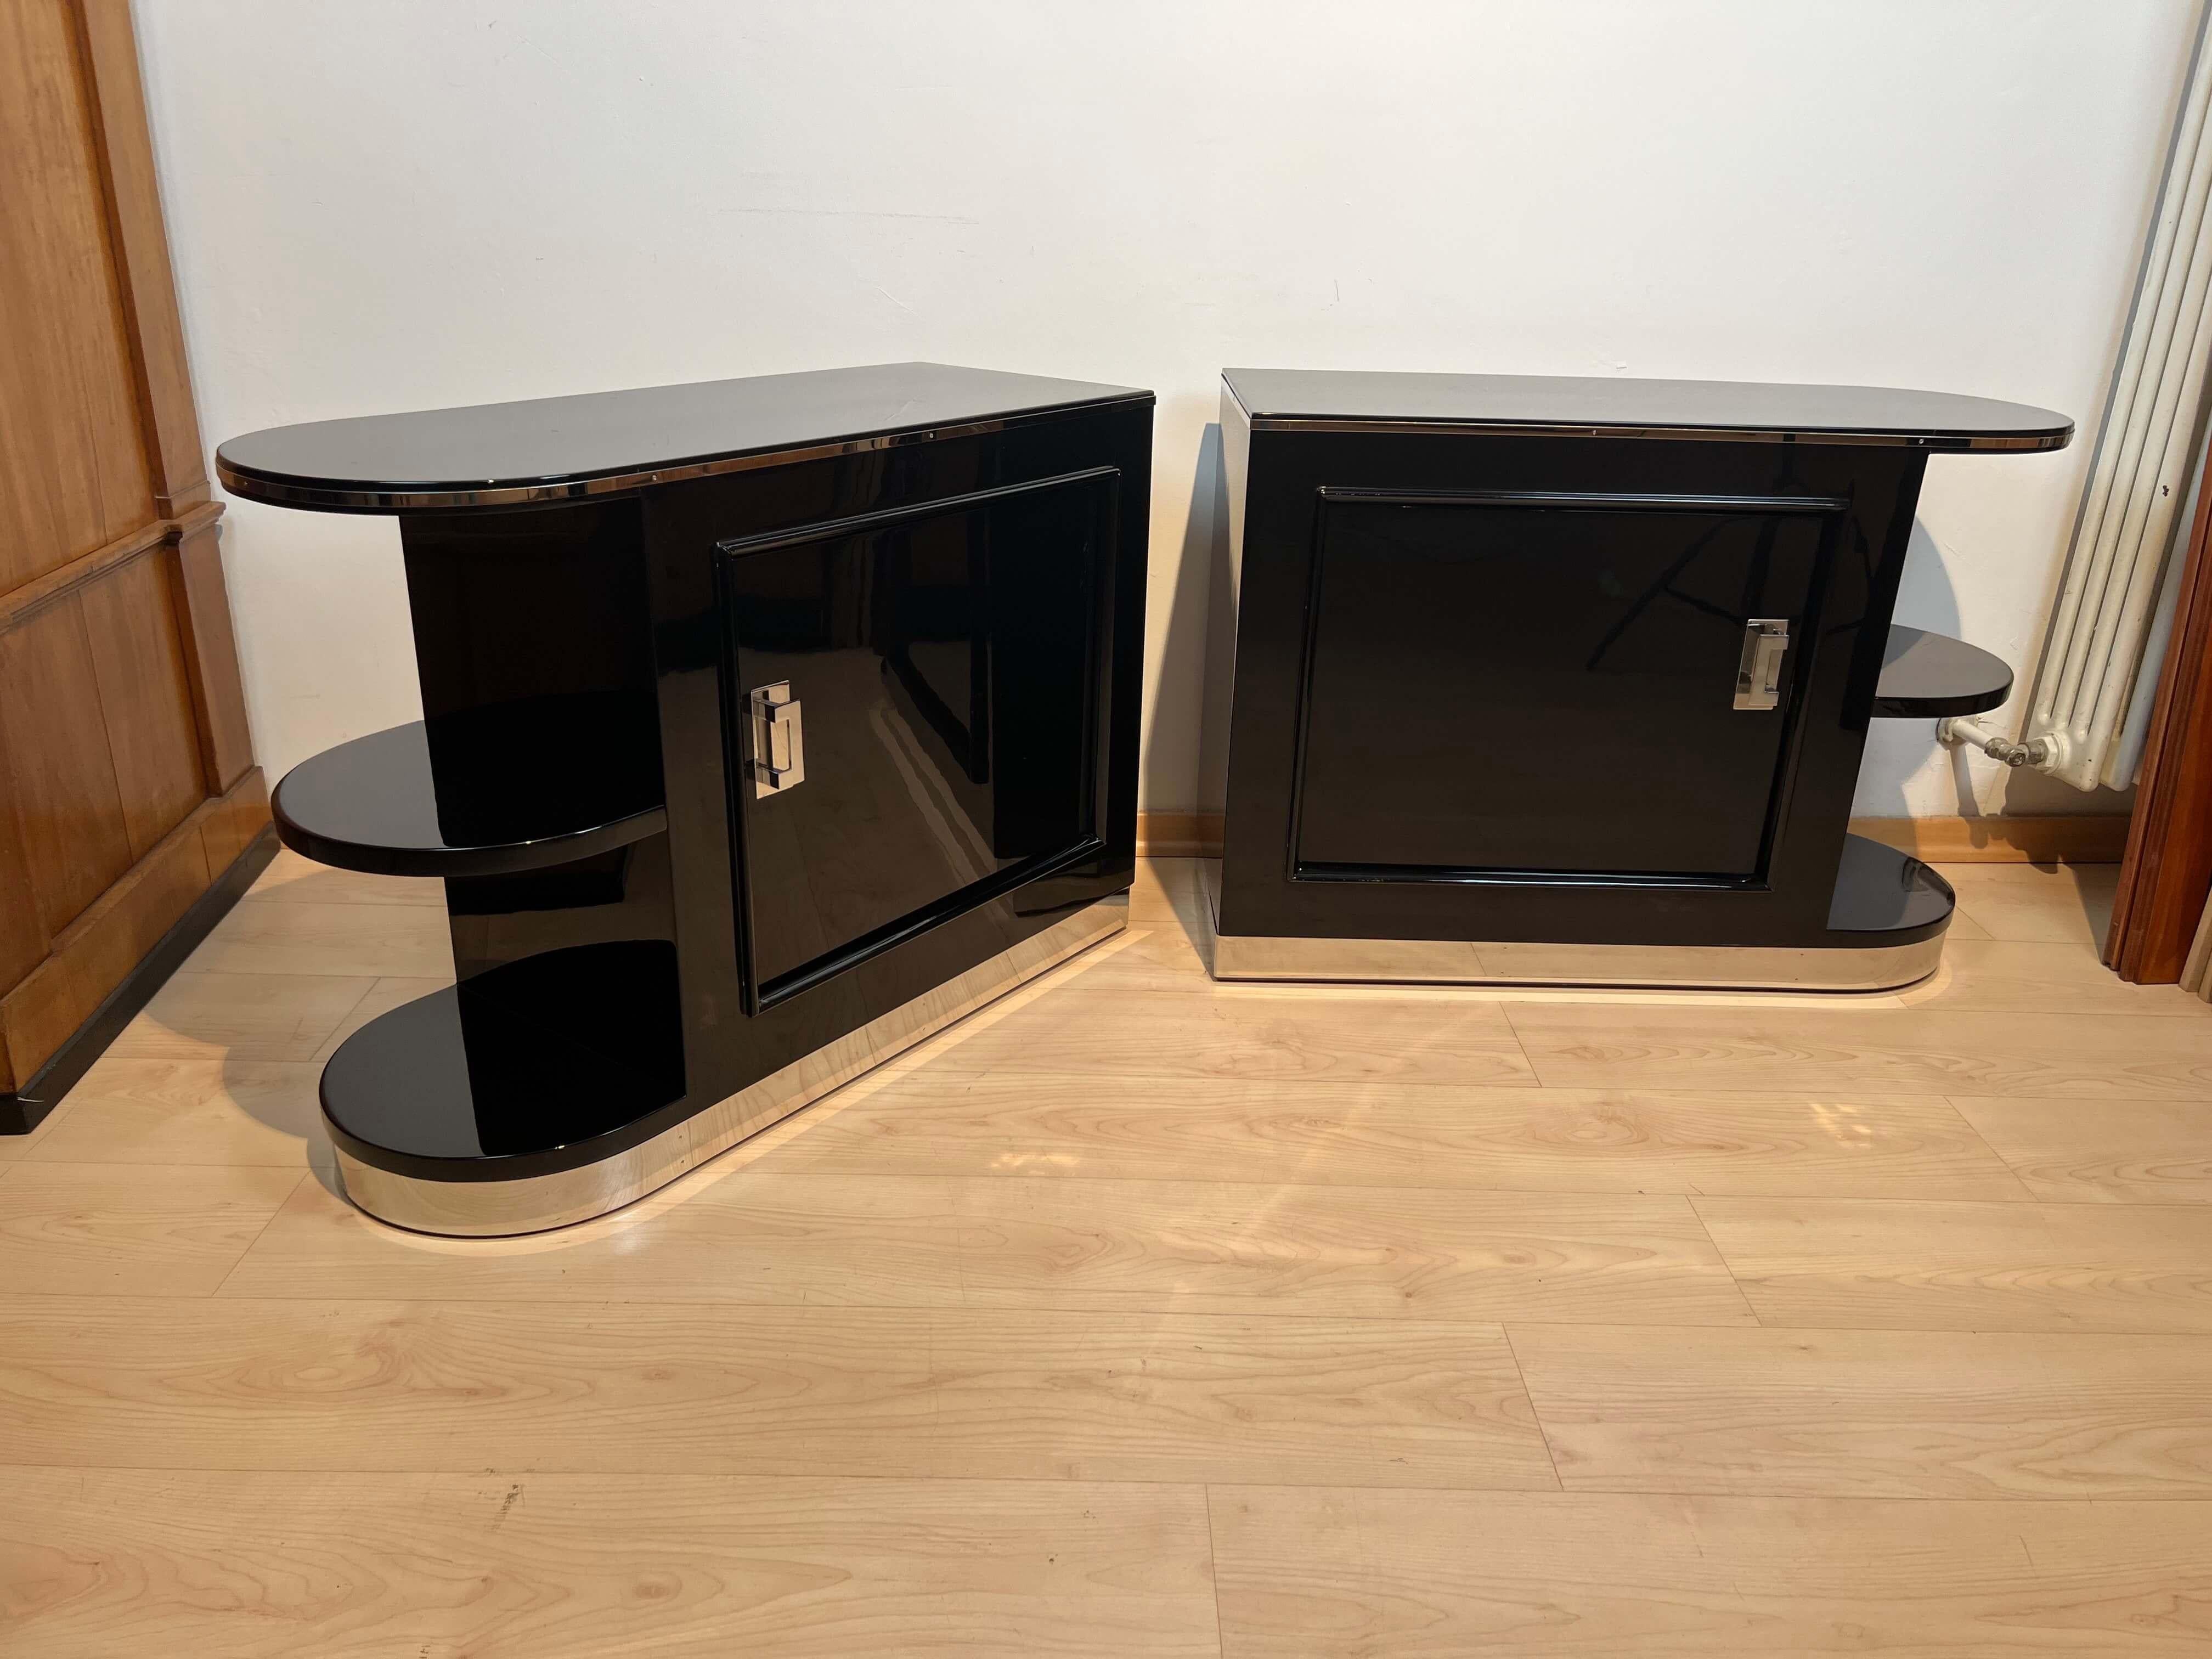 Pair of Art Deco cabinets / nightstands, black lacquer, metal, maple, France circa 1930.

Walnut, high-gloss black lacquered. Asymmetrical shape (round + straight) with shelves on the rounded side.
Door on one long side, compartment with shelf